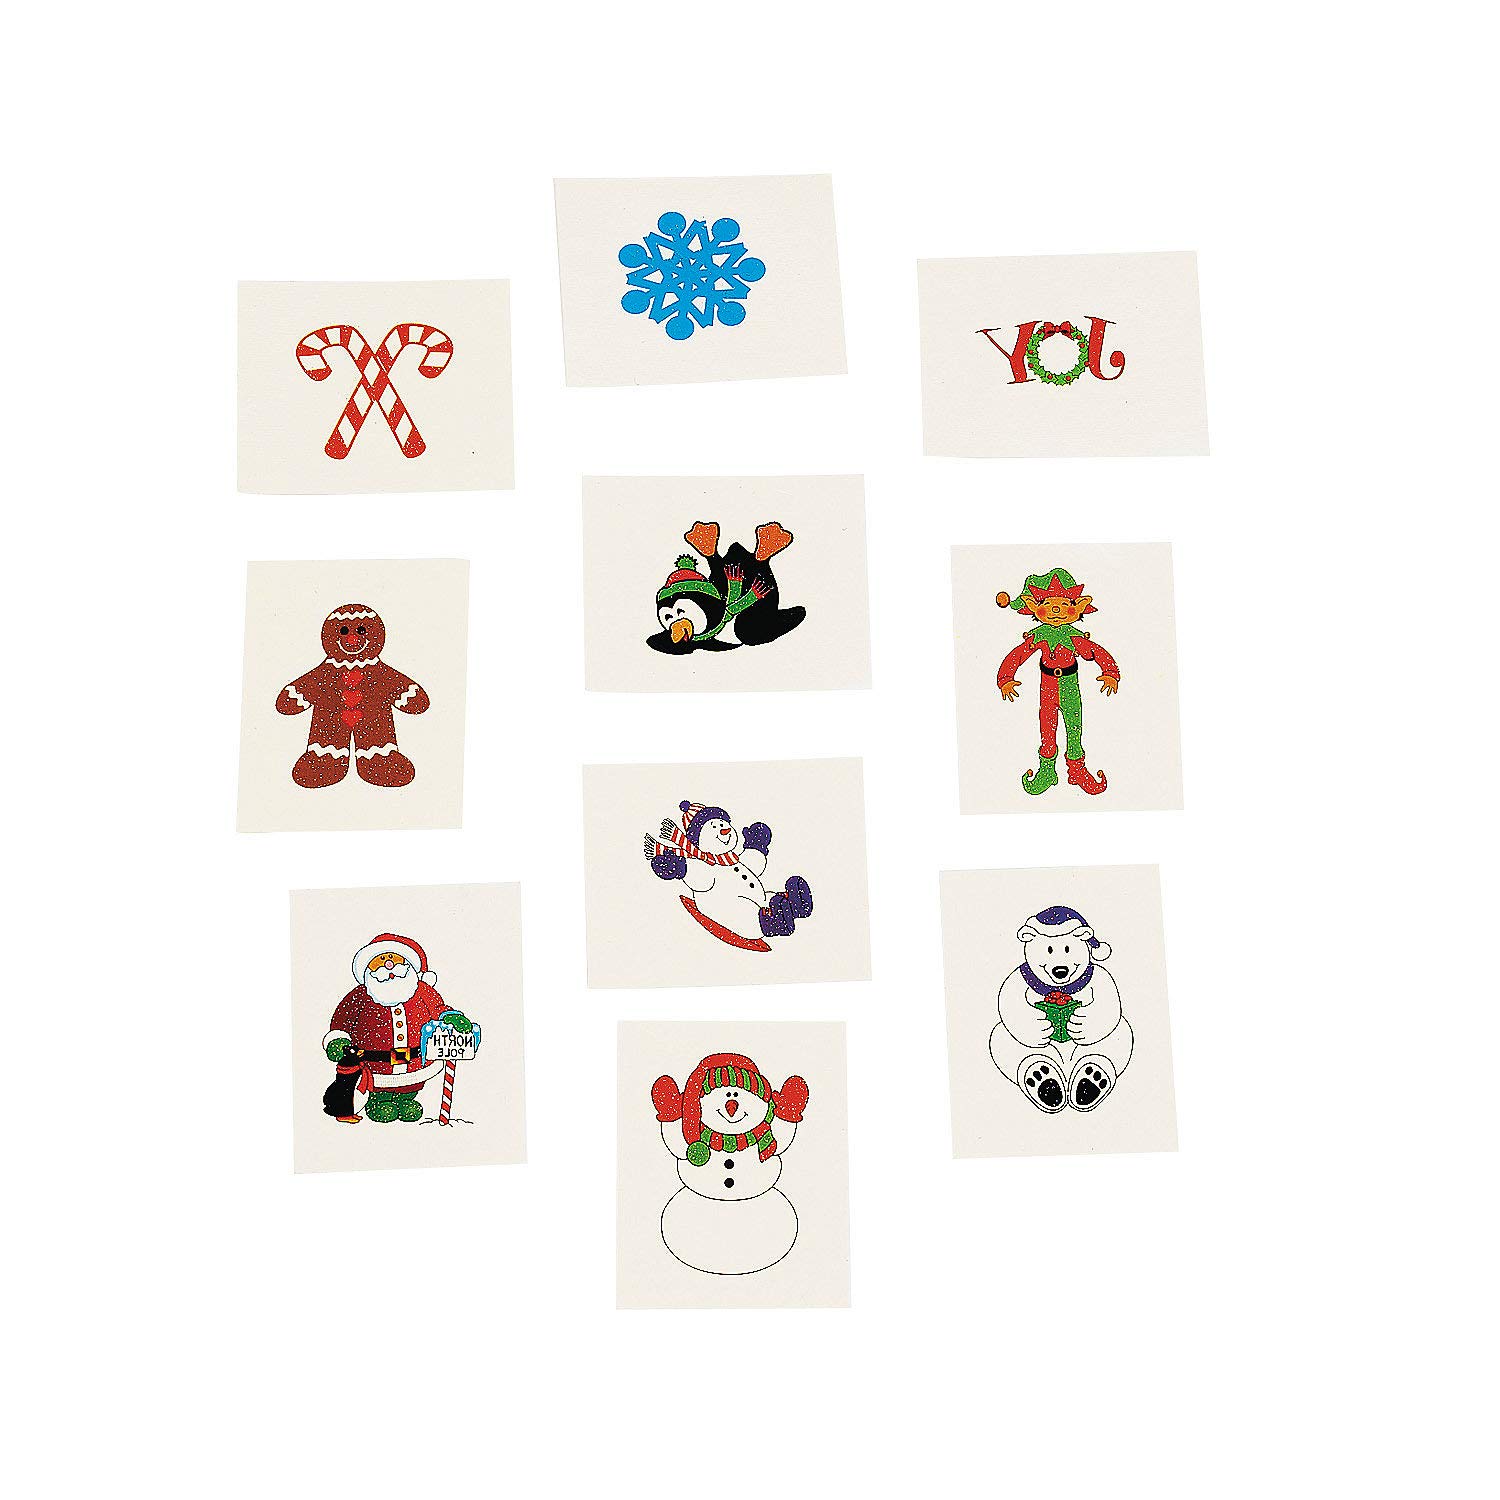 Christmas Holiday Glitter Temporary Tattoos For Kids (72 Pieces) Holiday Favors and Giveaways, Stocking Stuffers